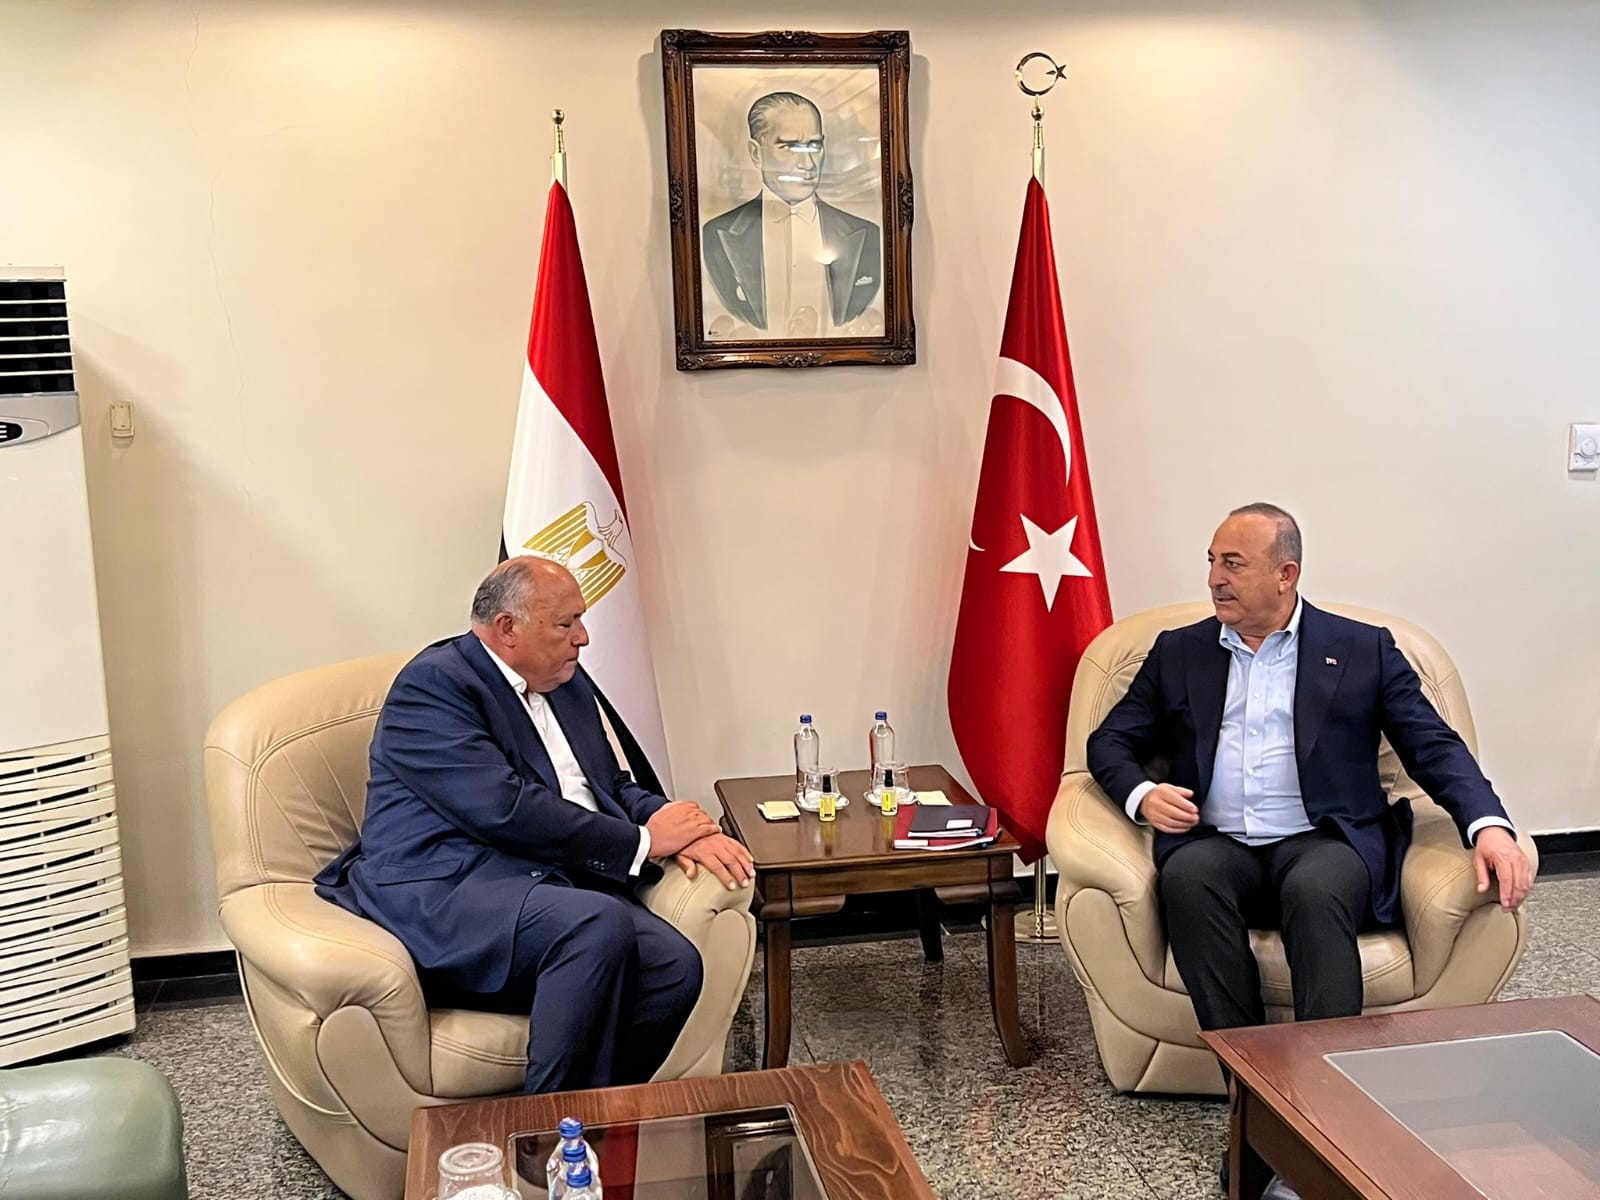 The Foreign Minister arrives in Turkey to convey a message of solidarity from Egypt, and his Turkish counterpart receives him 